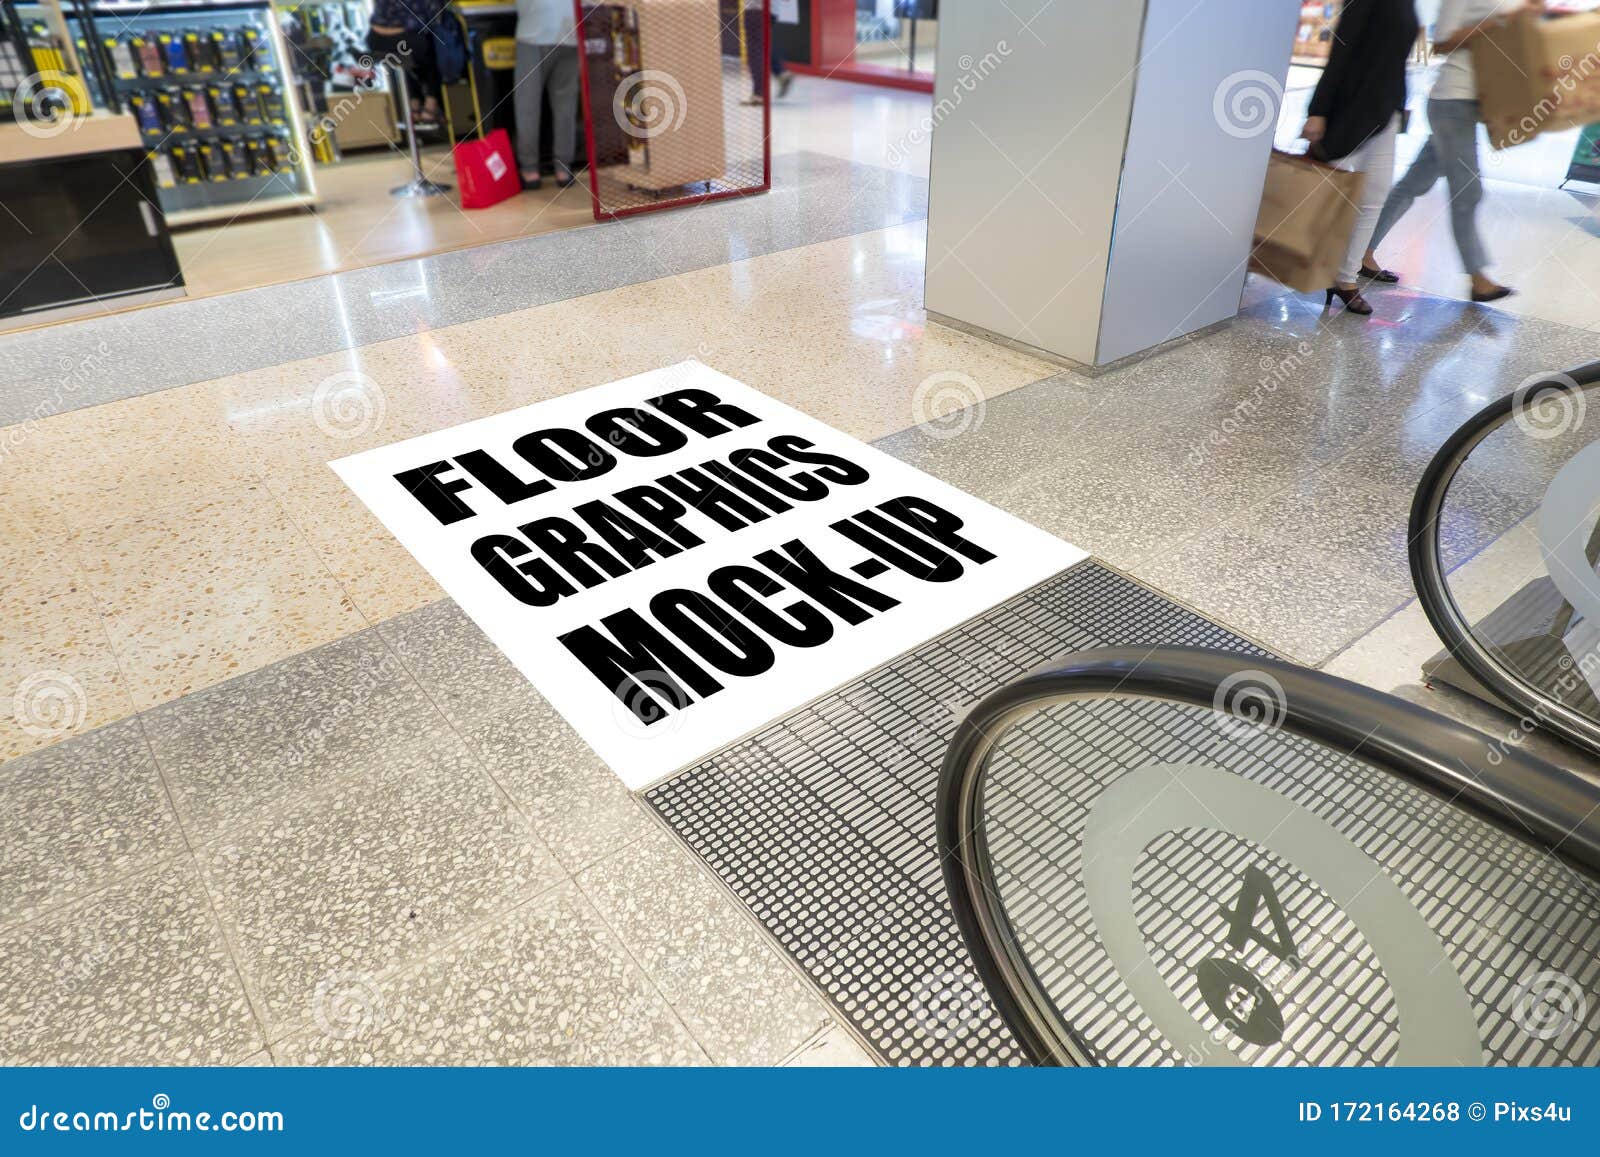 Download Mock Up Blank Screen For Graphic On Floor Near Escalator Stock Photo Image Of Display Canvas 172164268